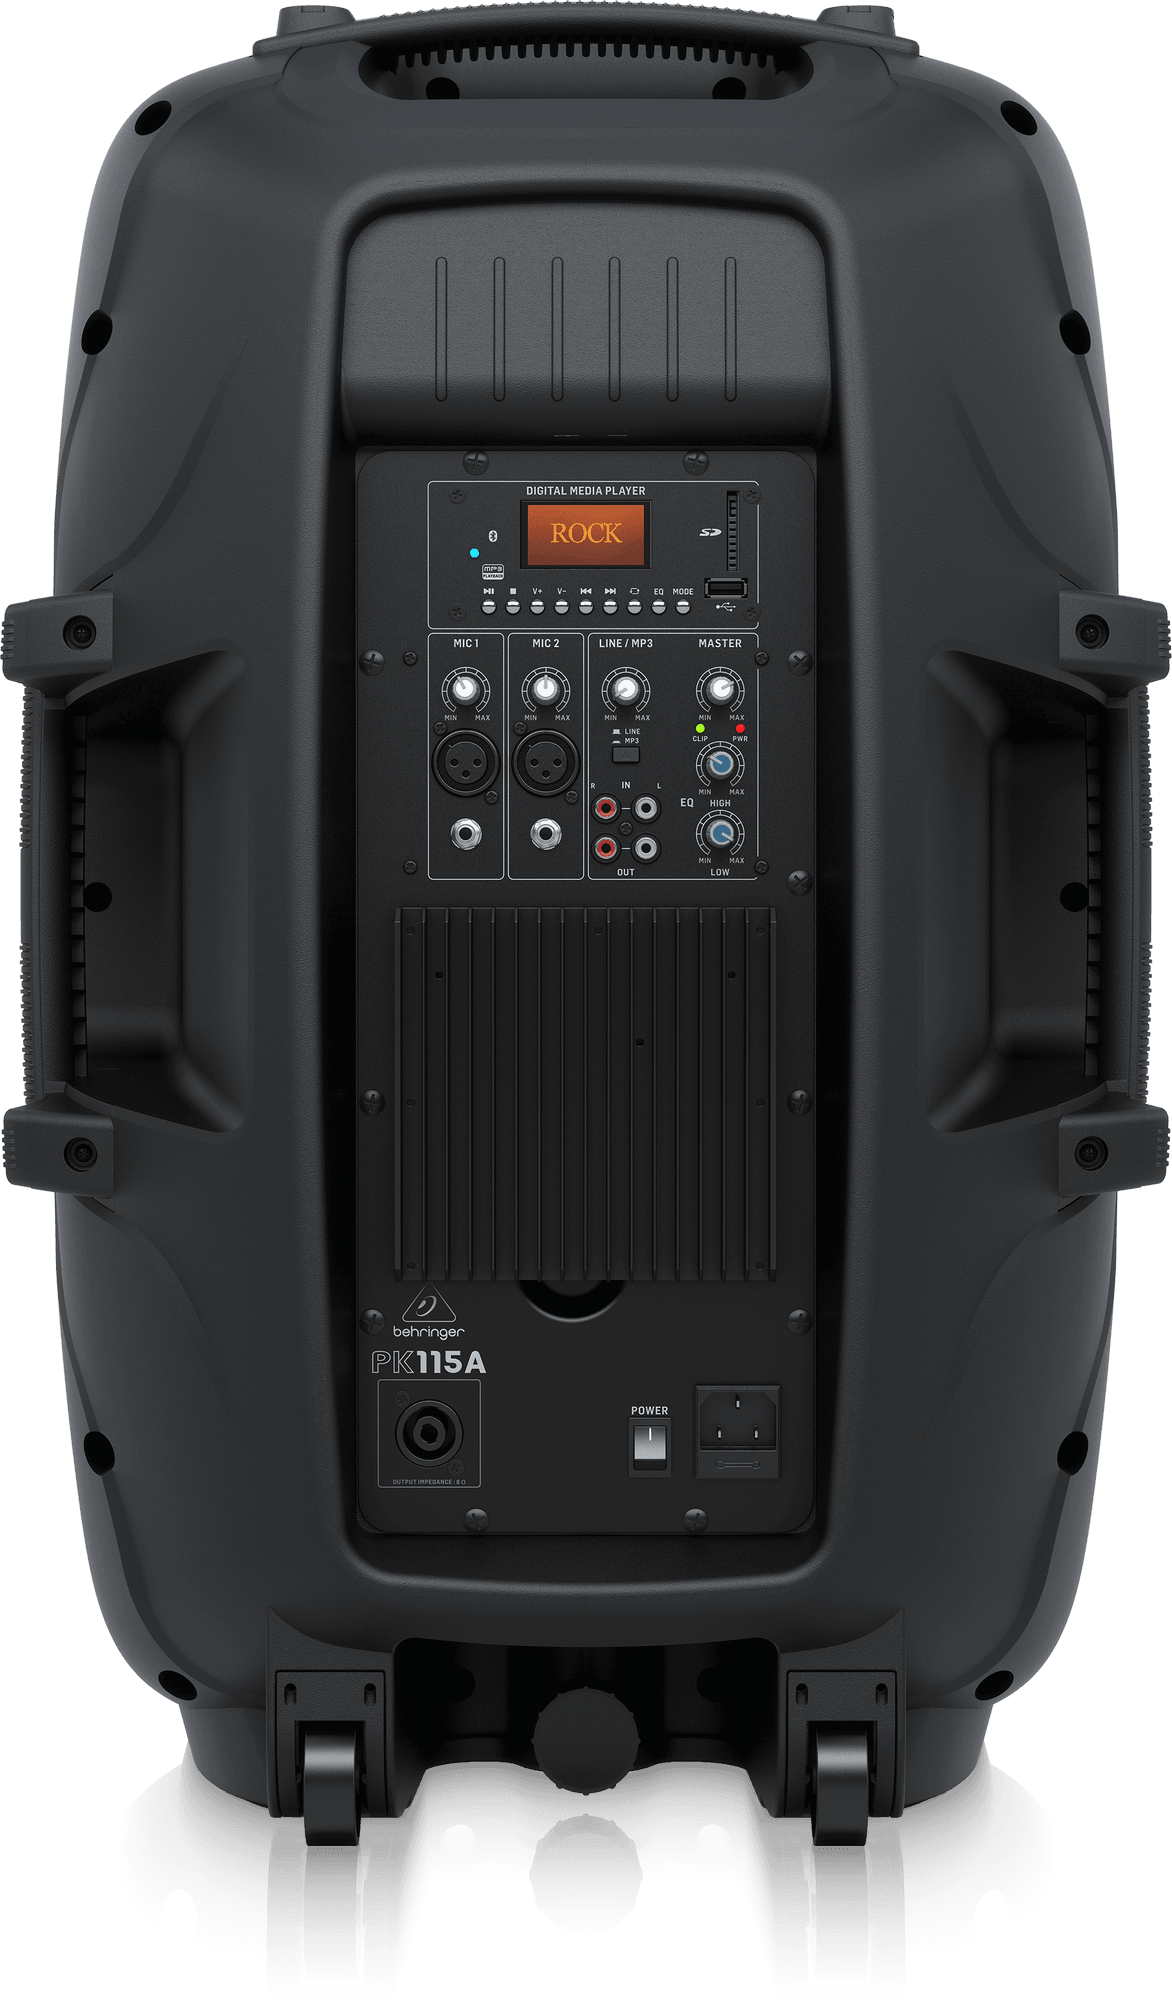 Behringer PK115A Active 800W 15" PA Speaker System with Bluetooth - Pair (PK-115A / PK 115A)  | BEHRINGER , Zoso Music